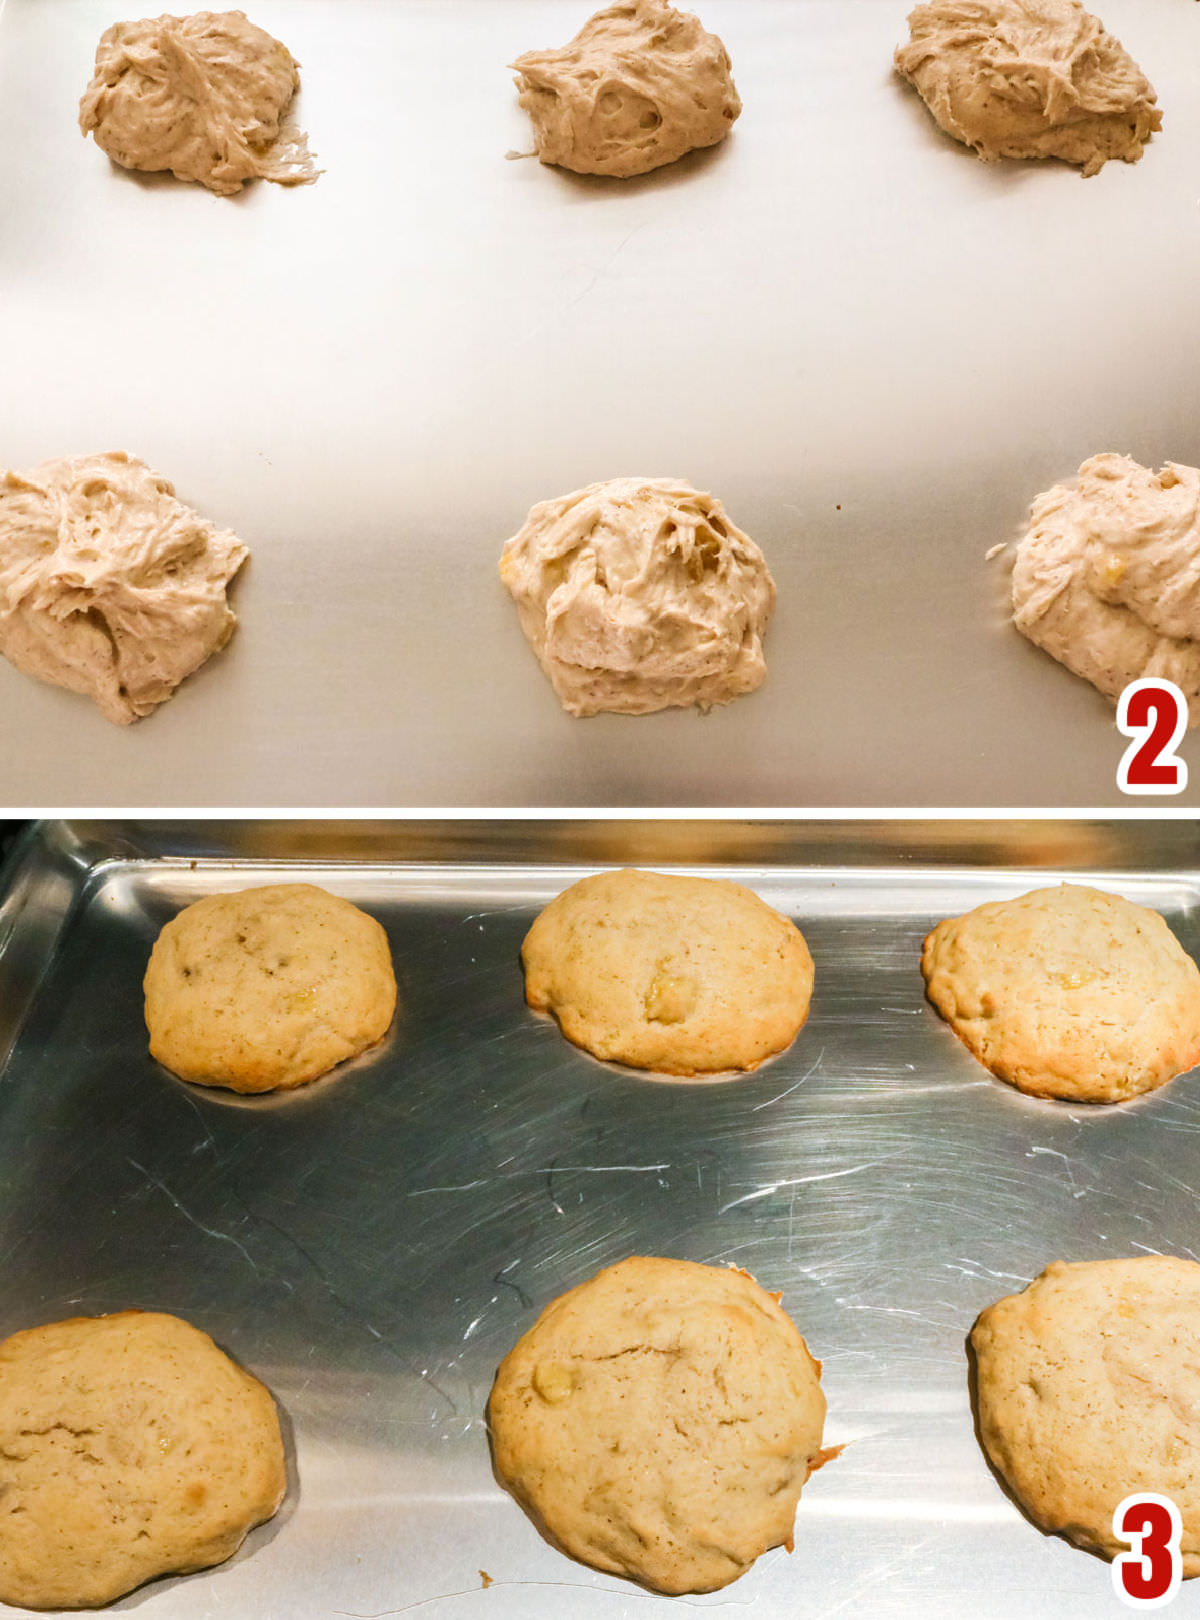 Collage image showing the steps for baking the Banana Spice Cookies.